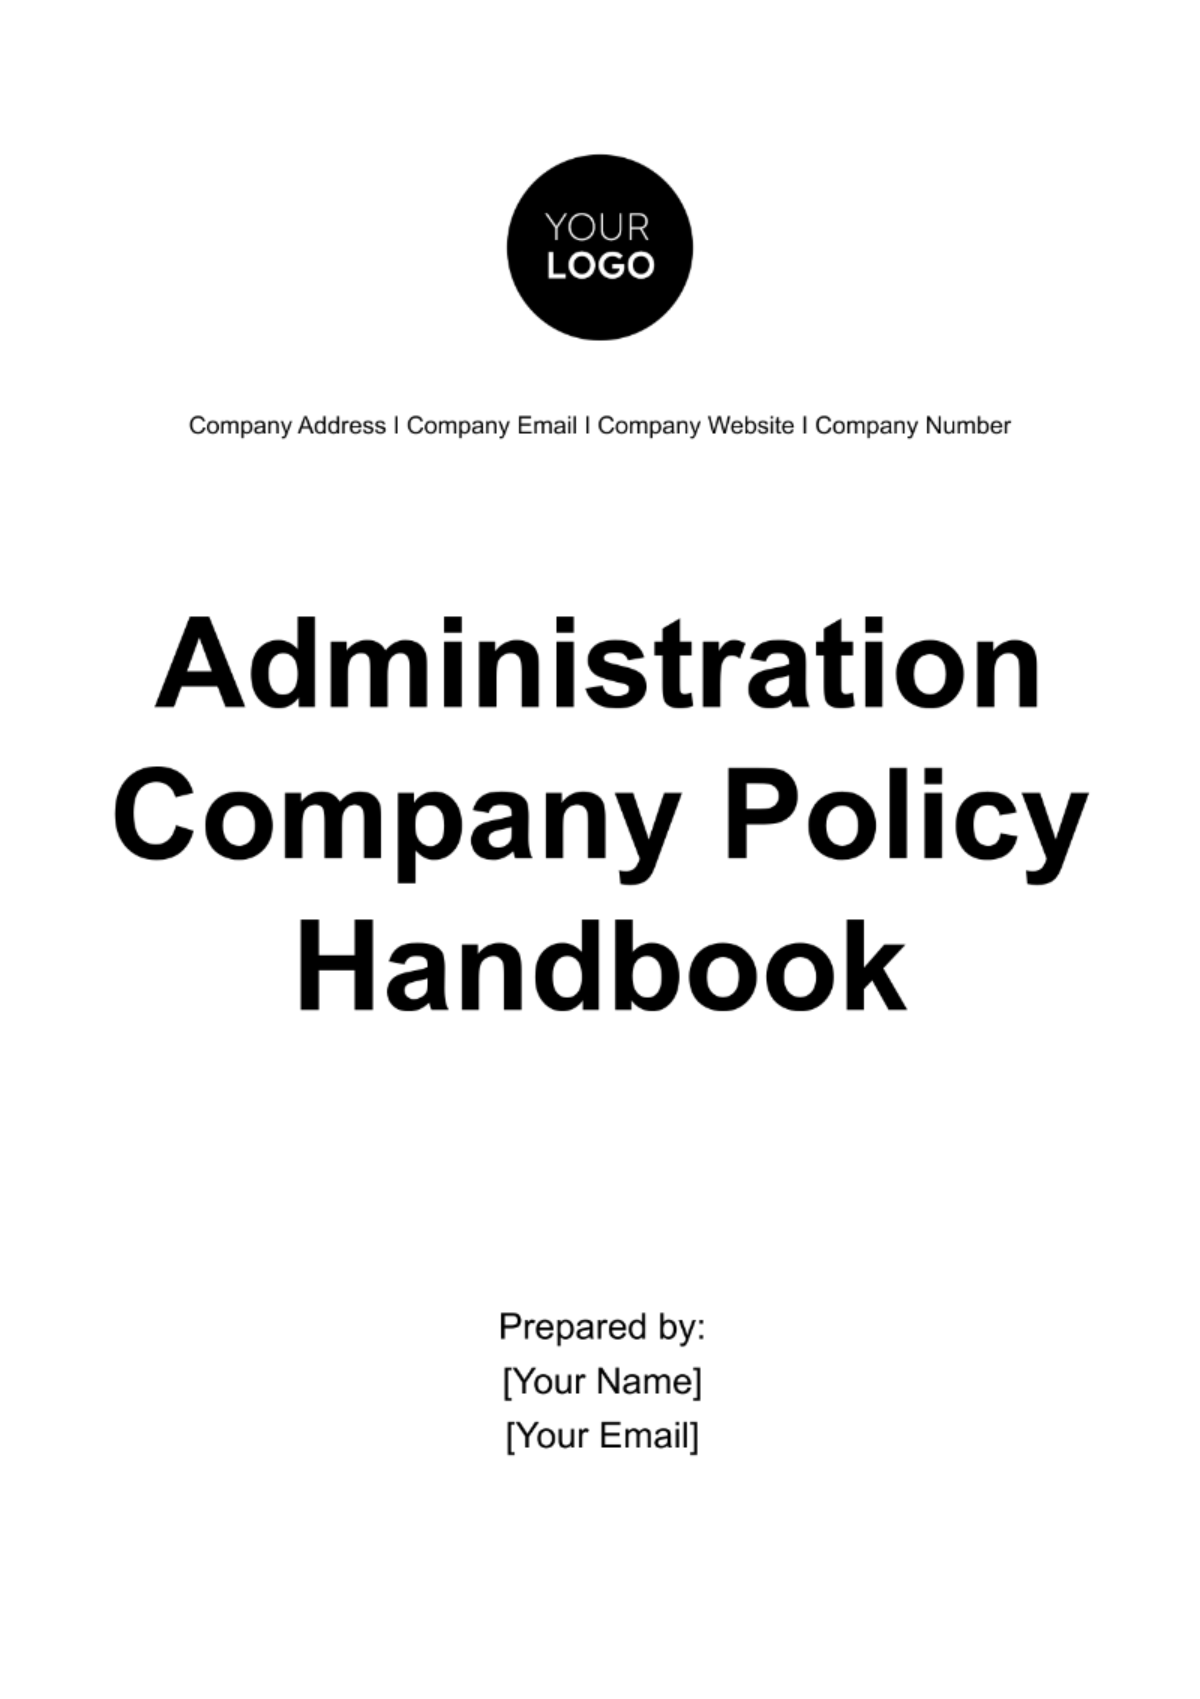 Administration Company Policy Handbook Template